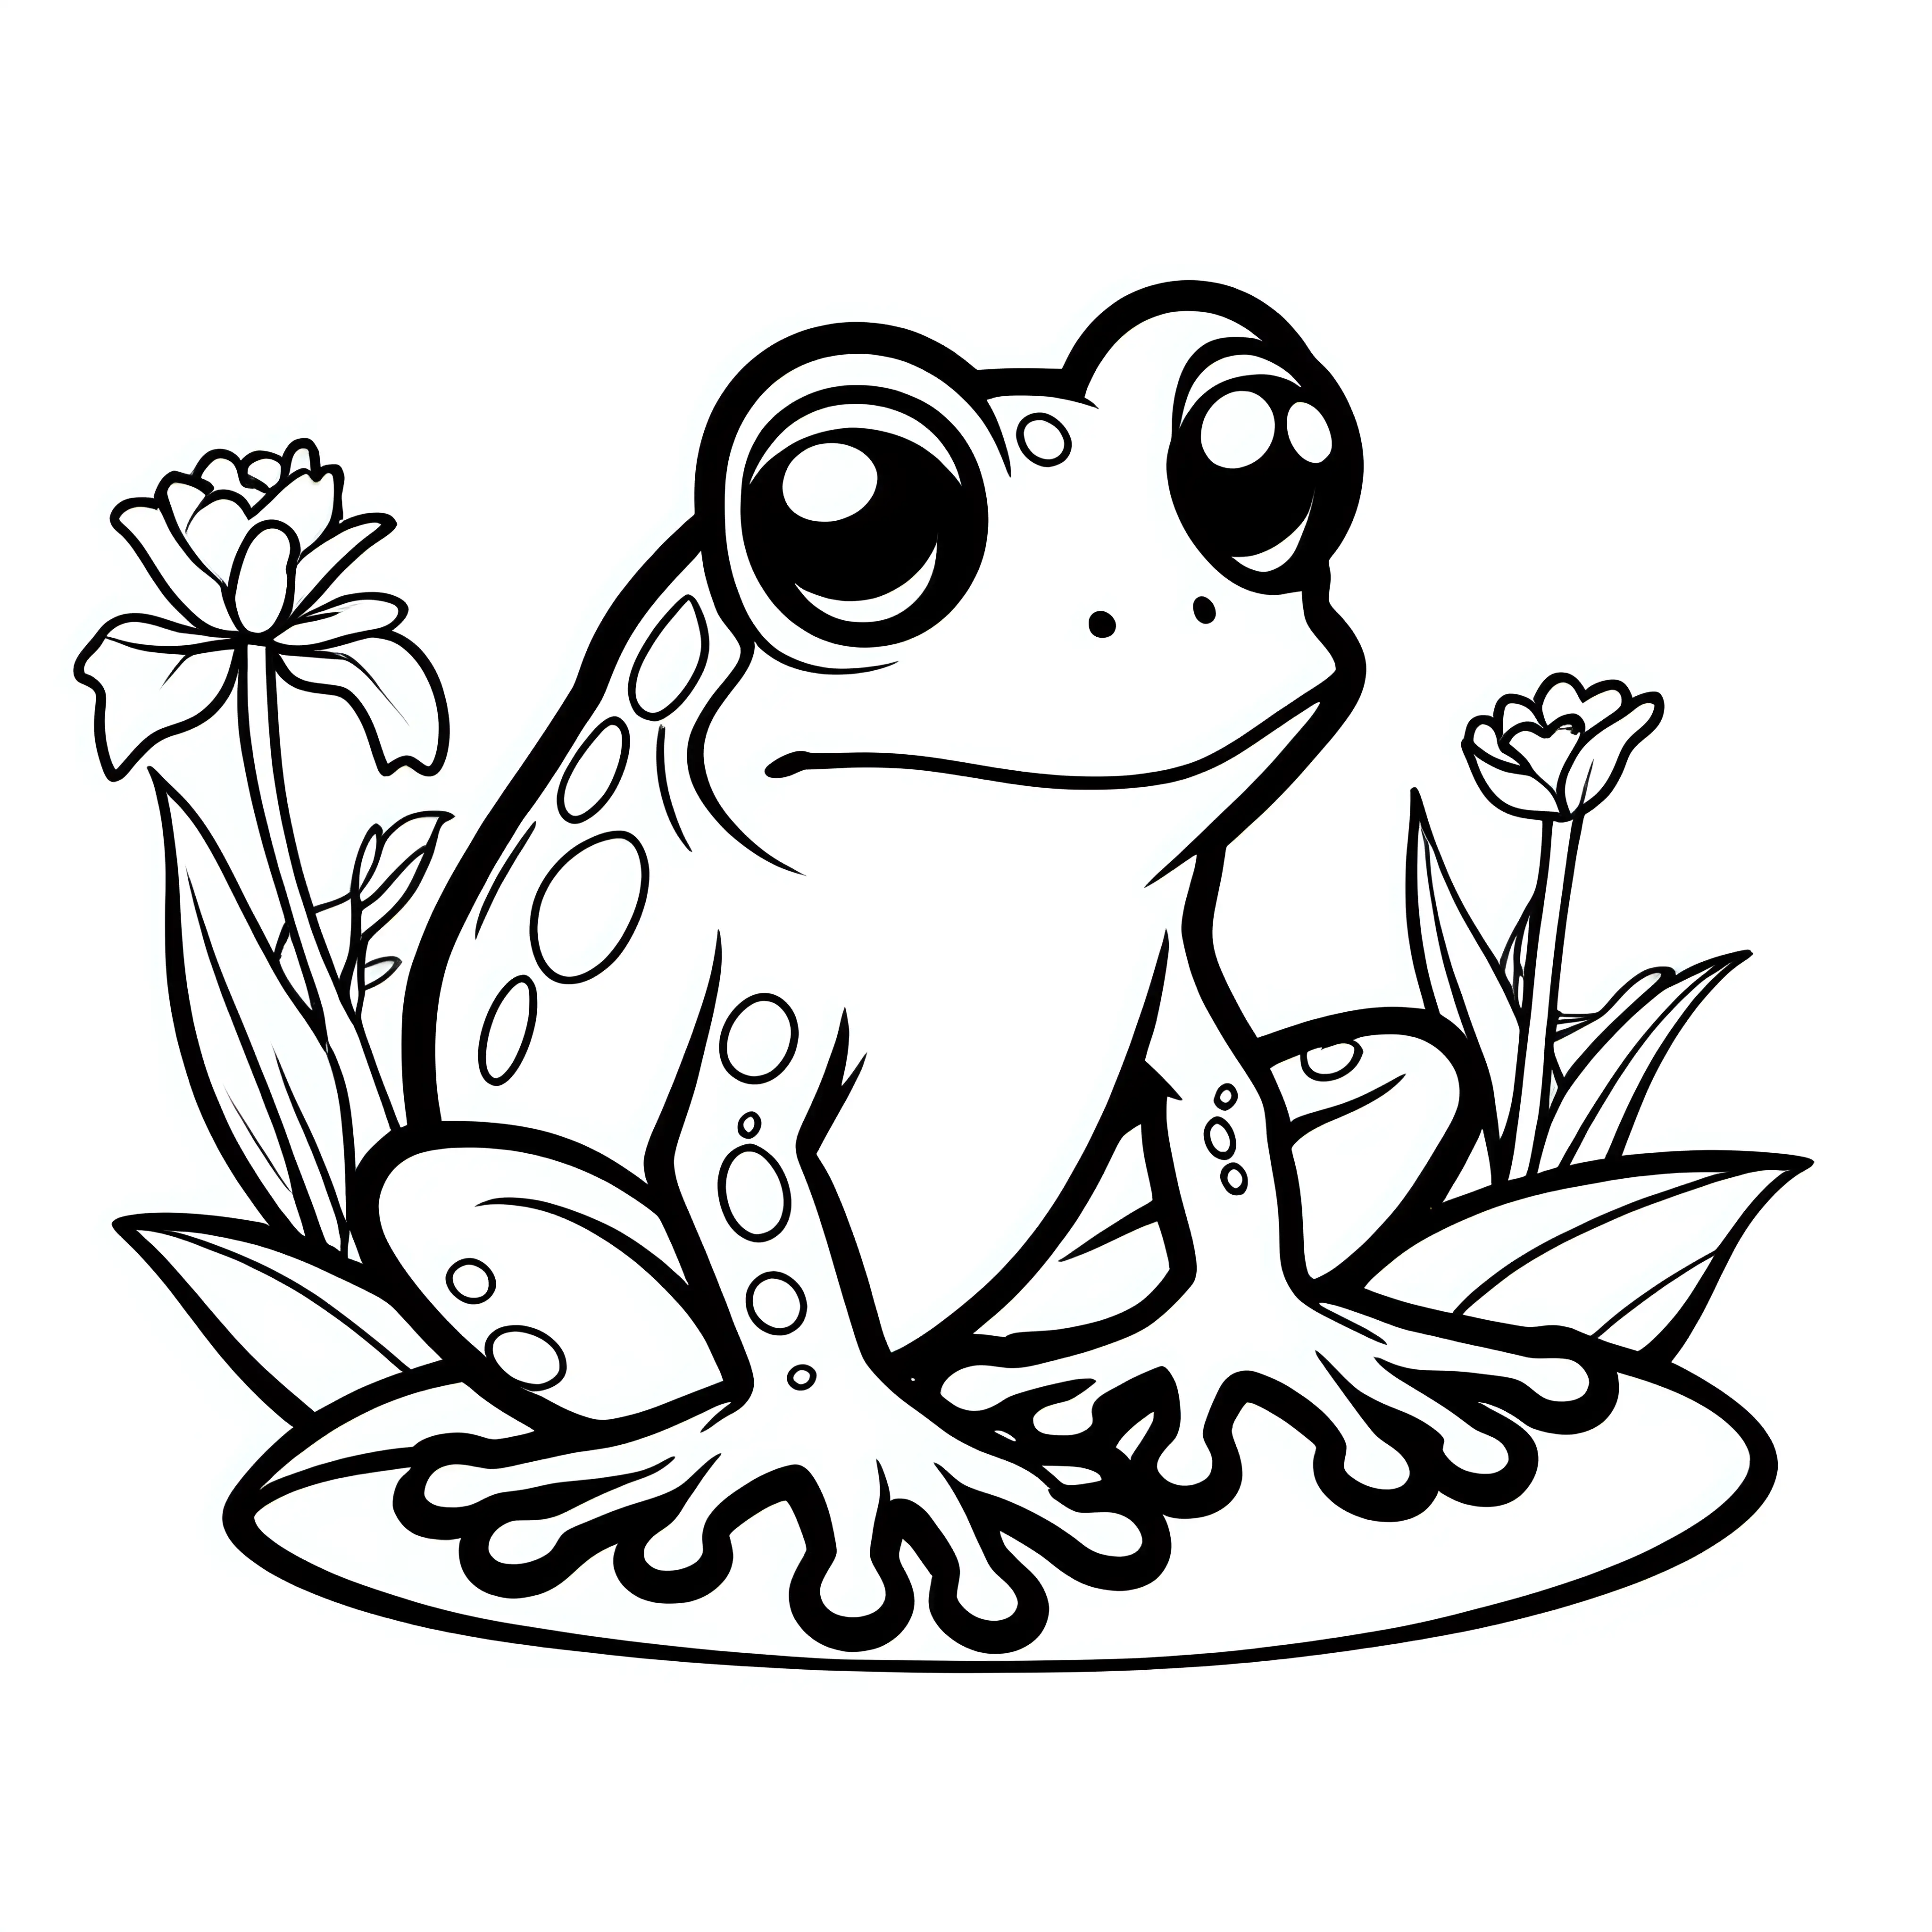 Learn How to Draw a Frog Step by Step